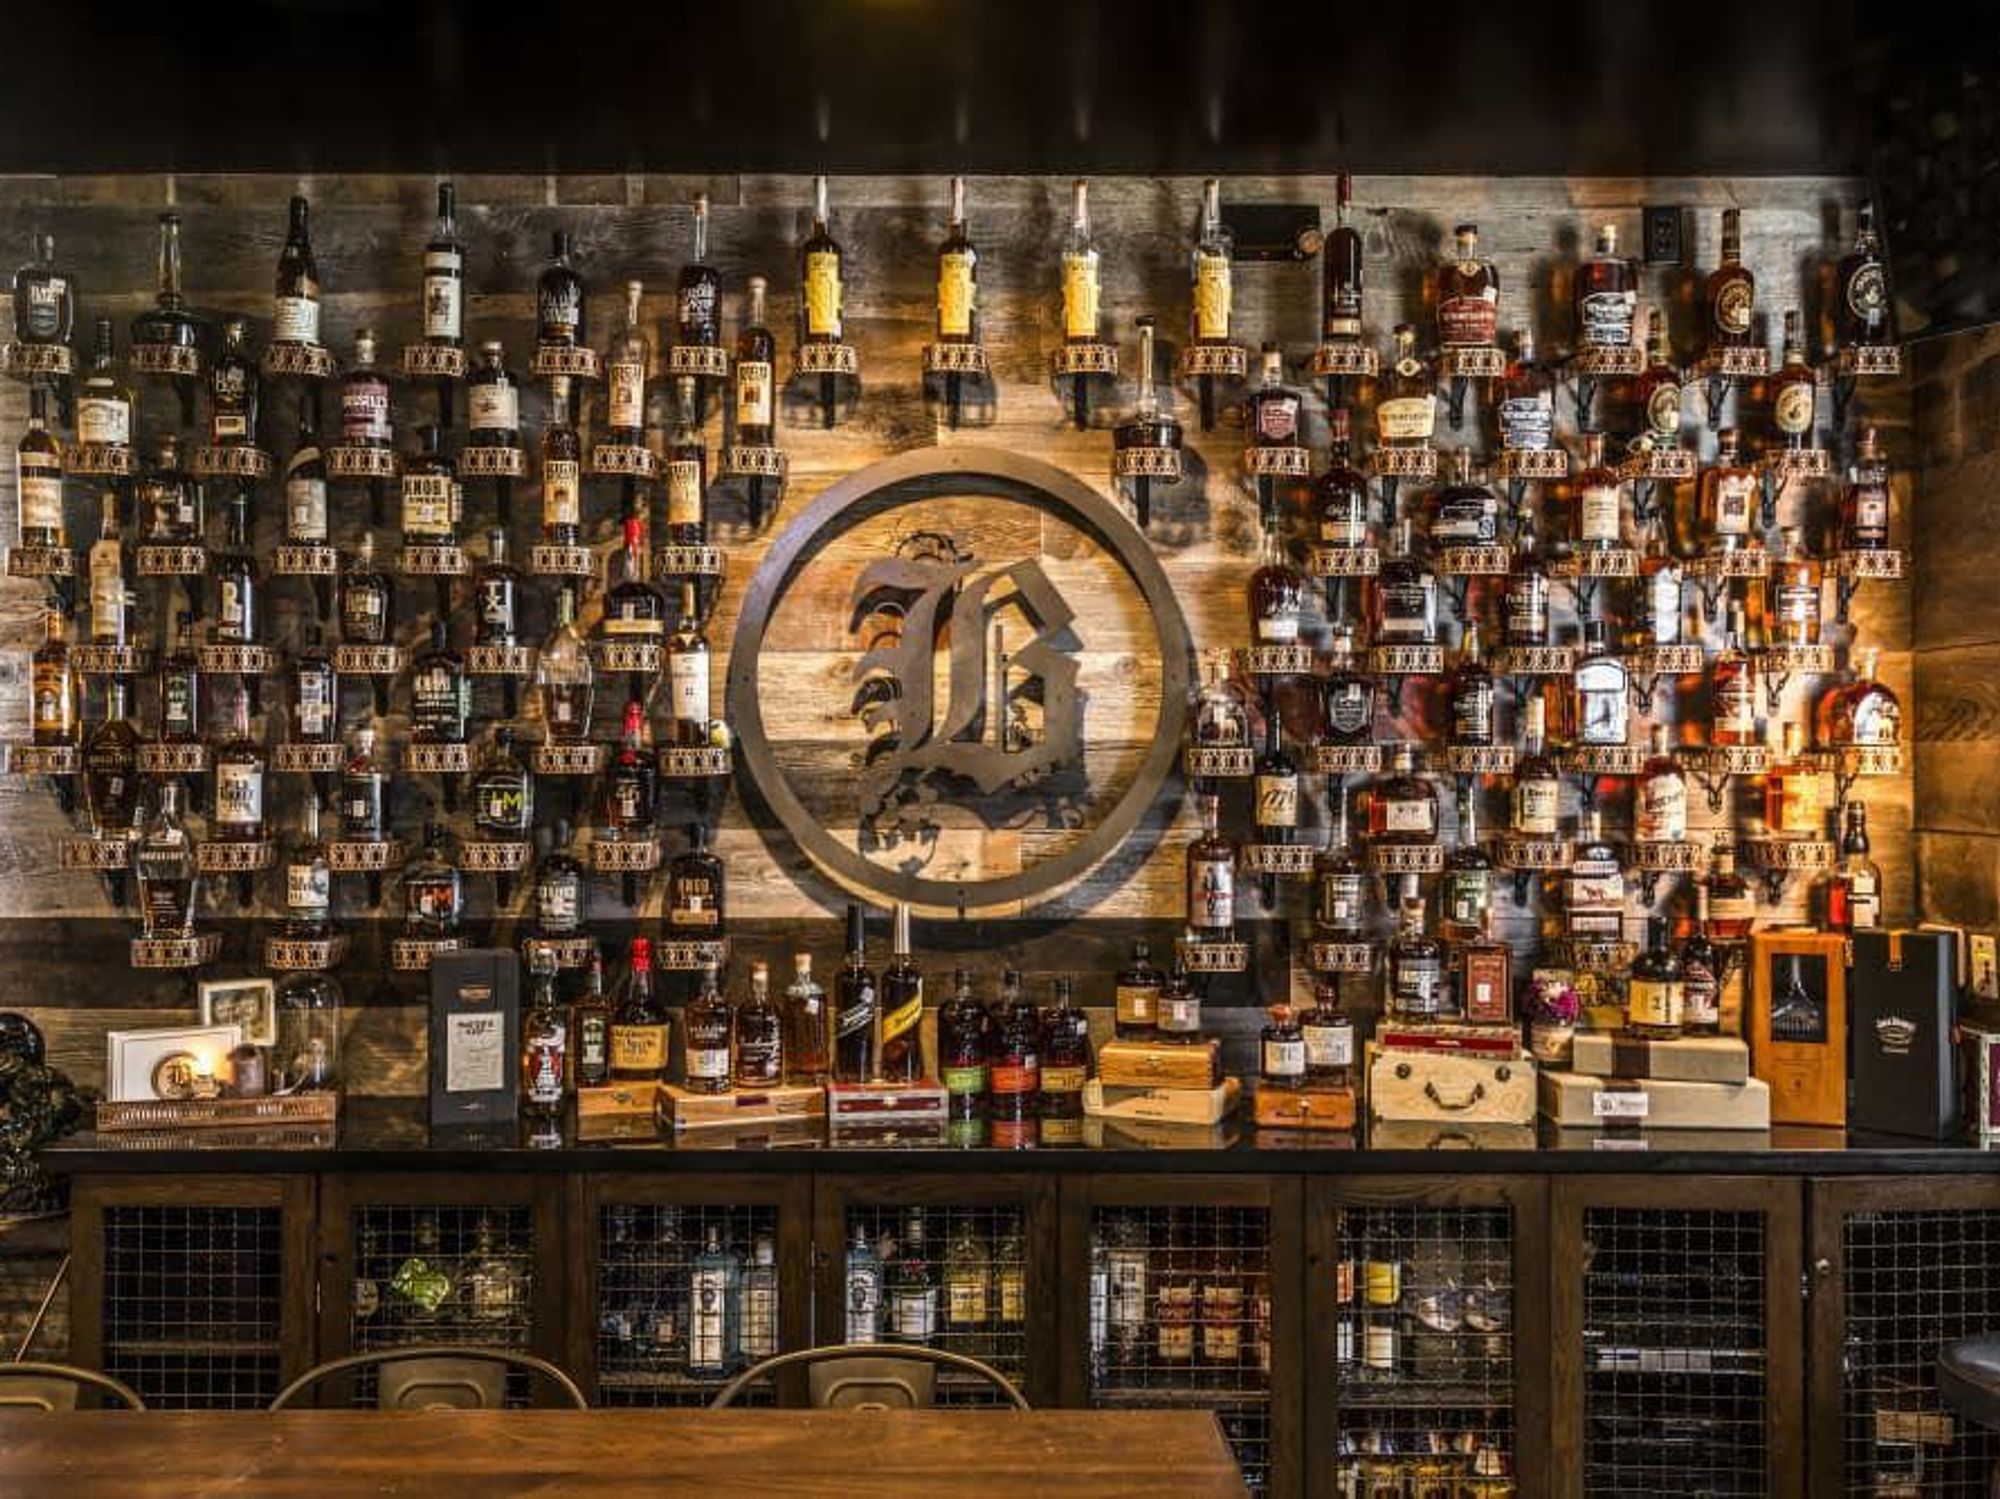 Bosscat Kitchen is bringing its whiskey room to The Woodlands.